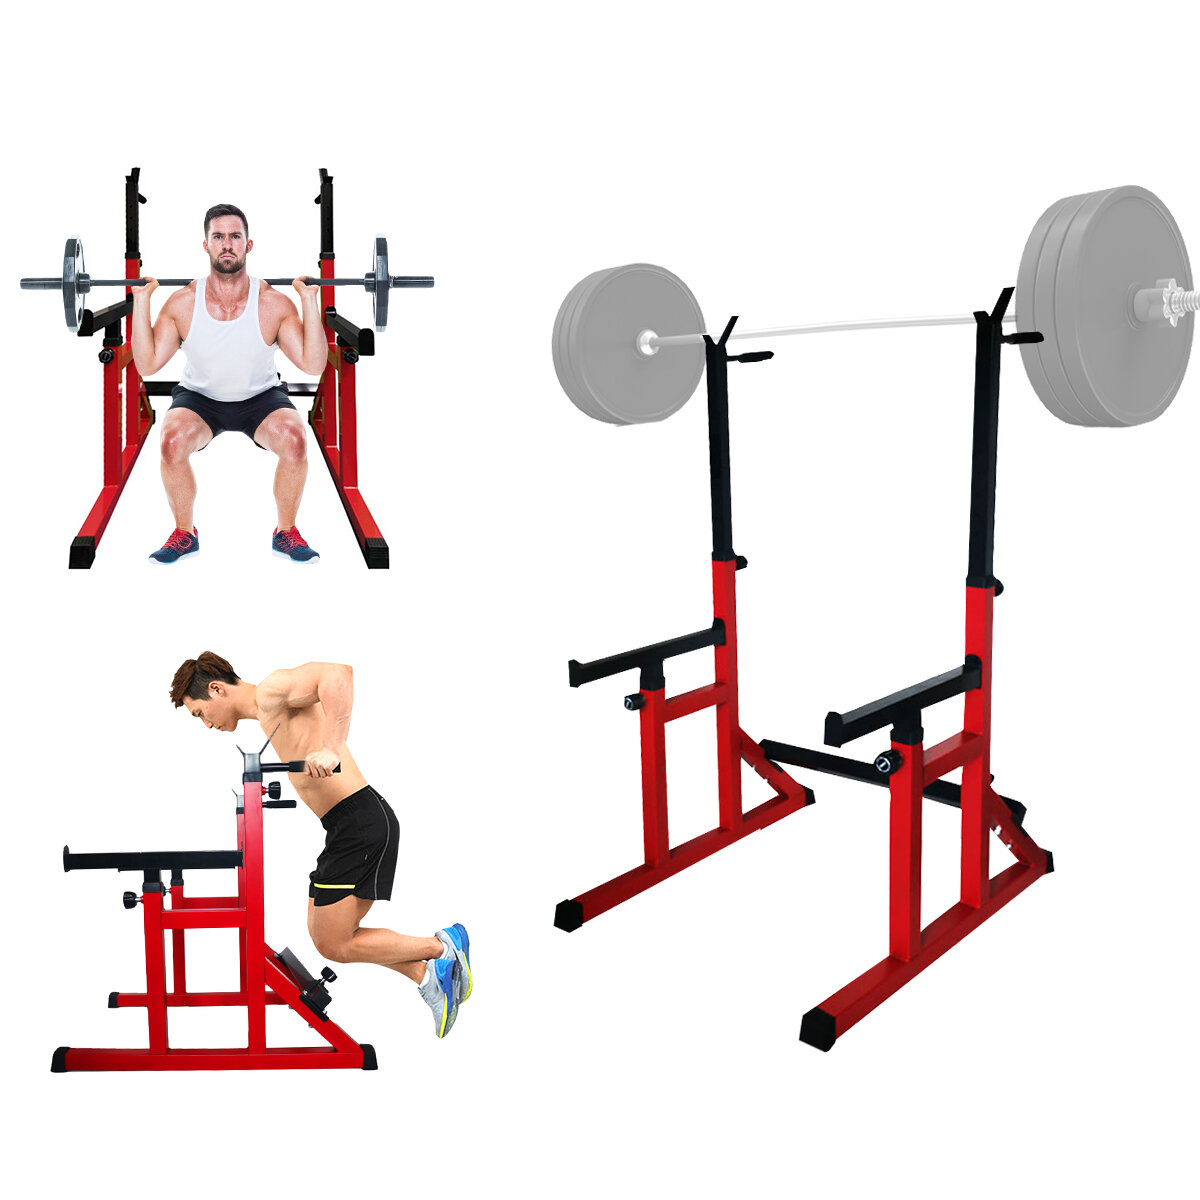 Adjustable Barbell Stand Lifting Dip Stand Squat Rack Weight Lifting Home Gym Fitness Sport Max Load 500kg